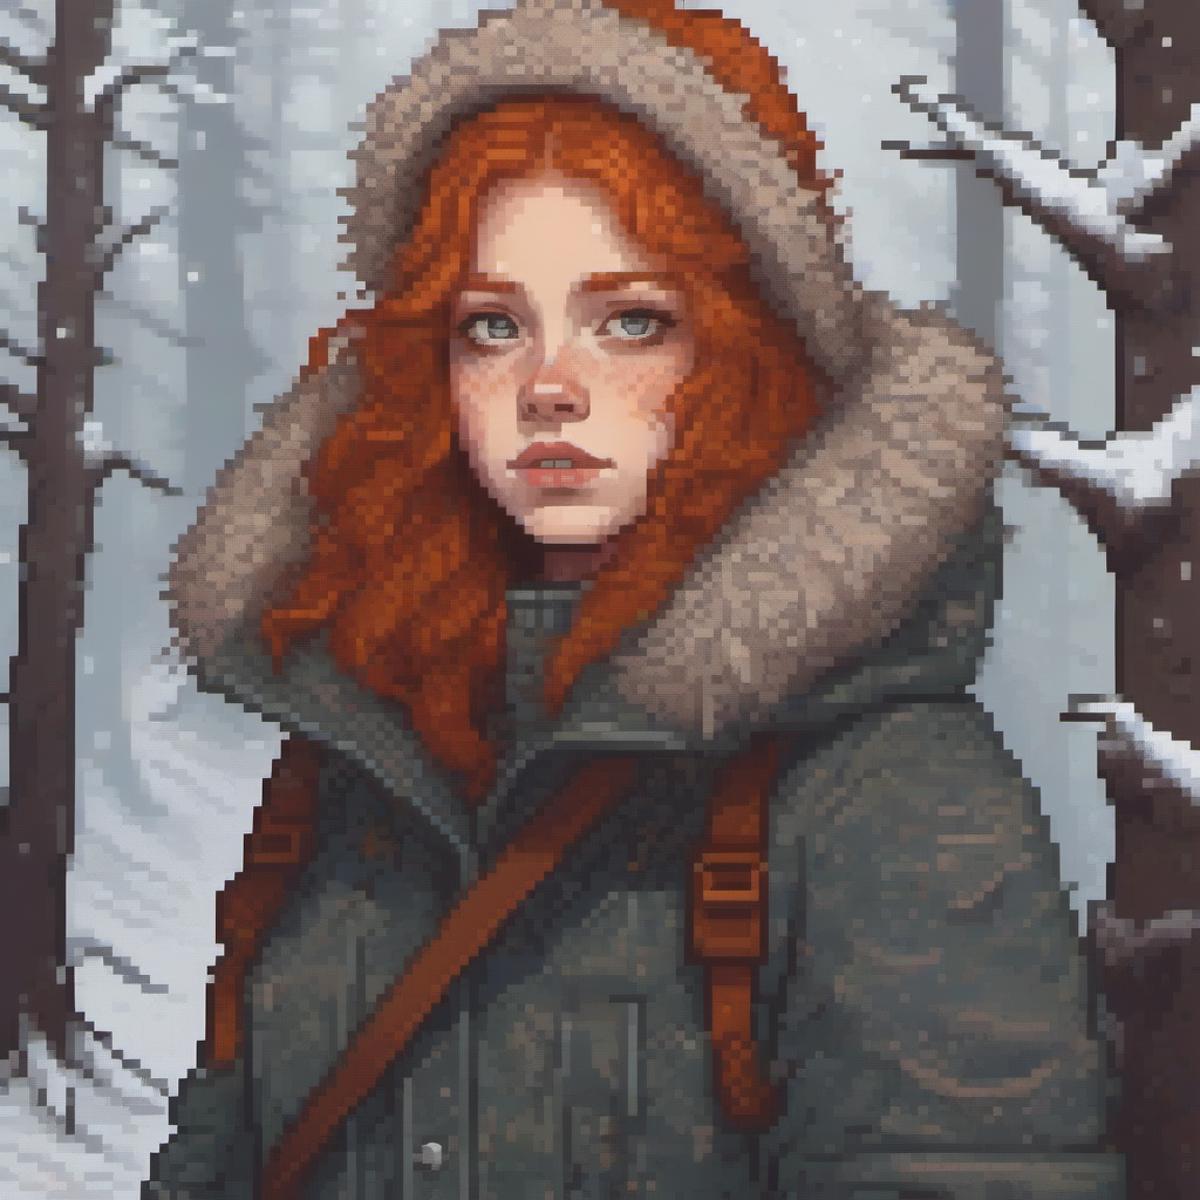 A woman wearing a winter coat and a backpack.